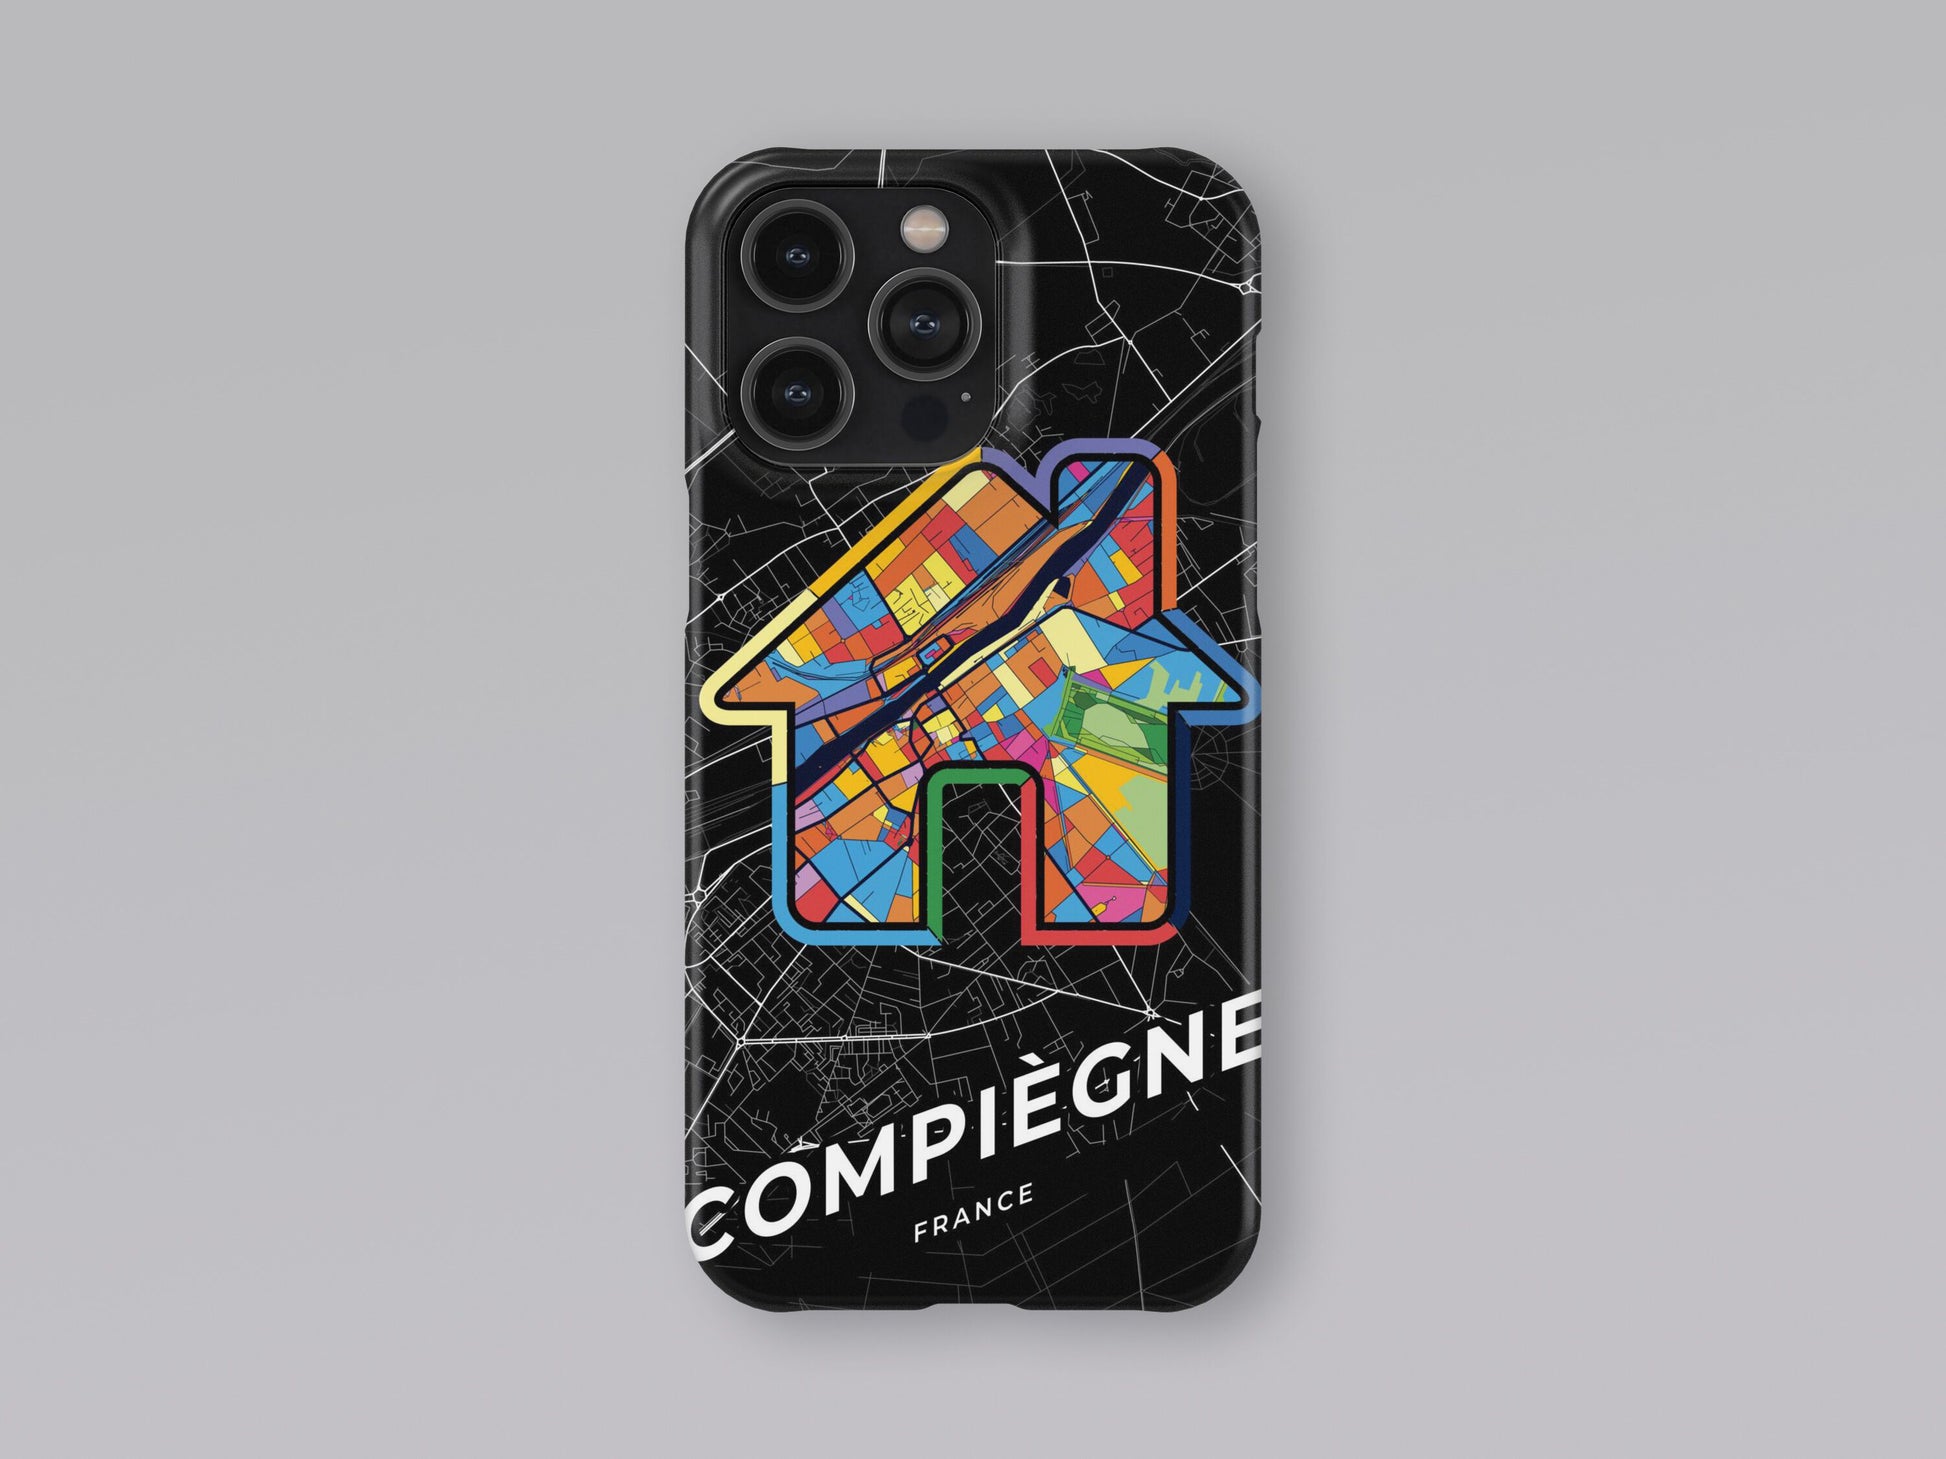 Compiègne France slim phone case with colorful icon. Birthday, wedding or housewarming gift. Couple match cases. 3